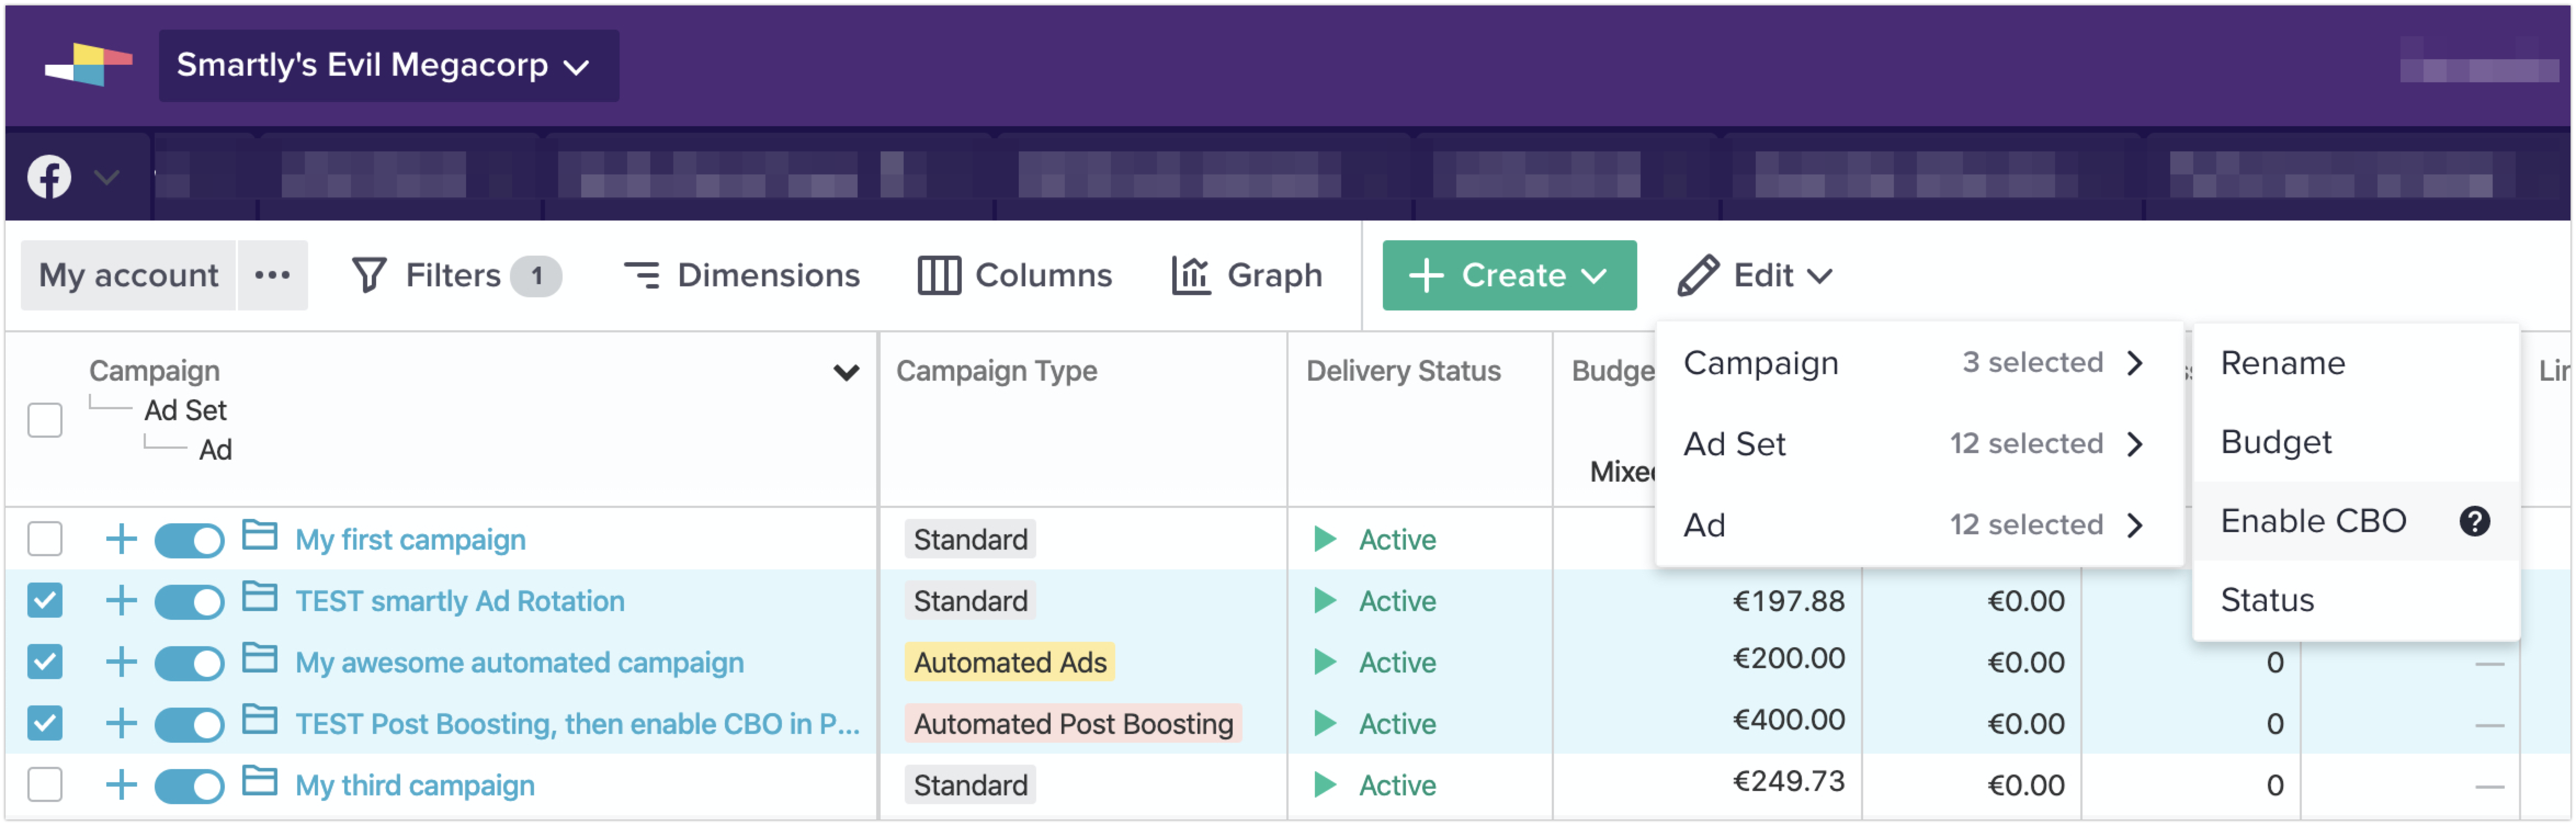 Enabling Facebook CBO for multiple existing campaigns